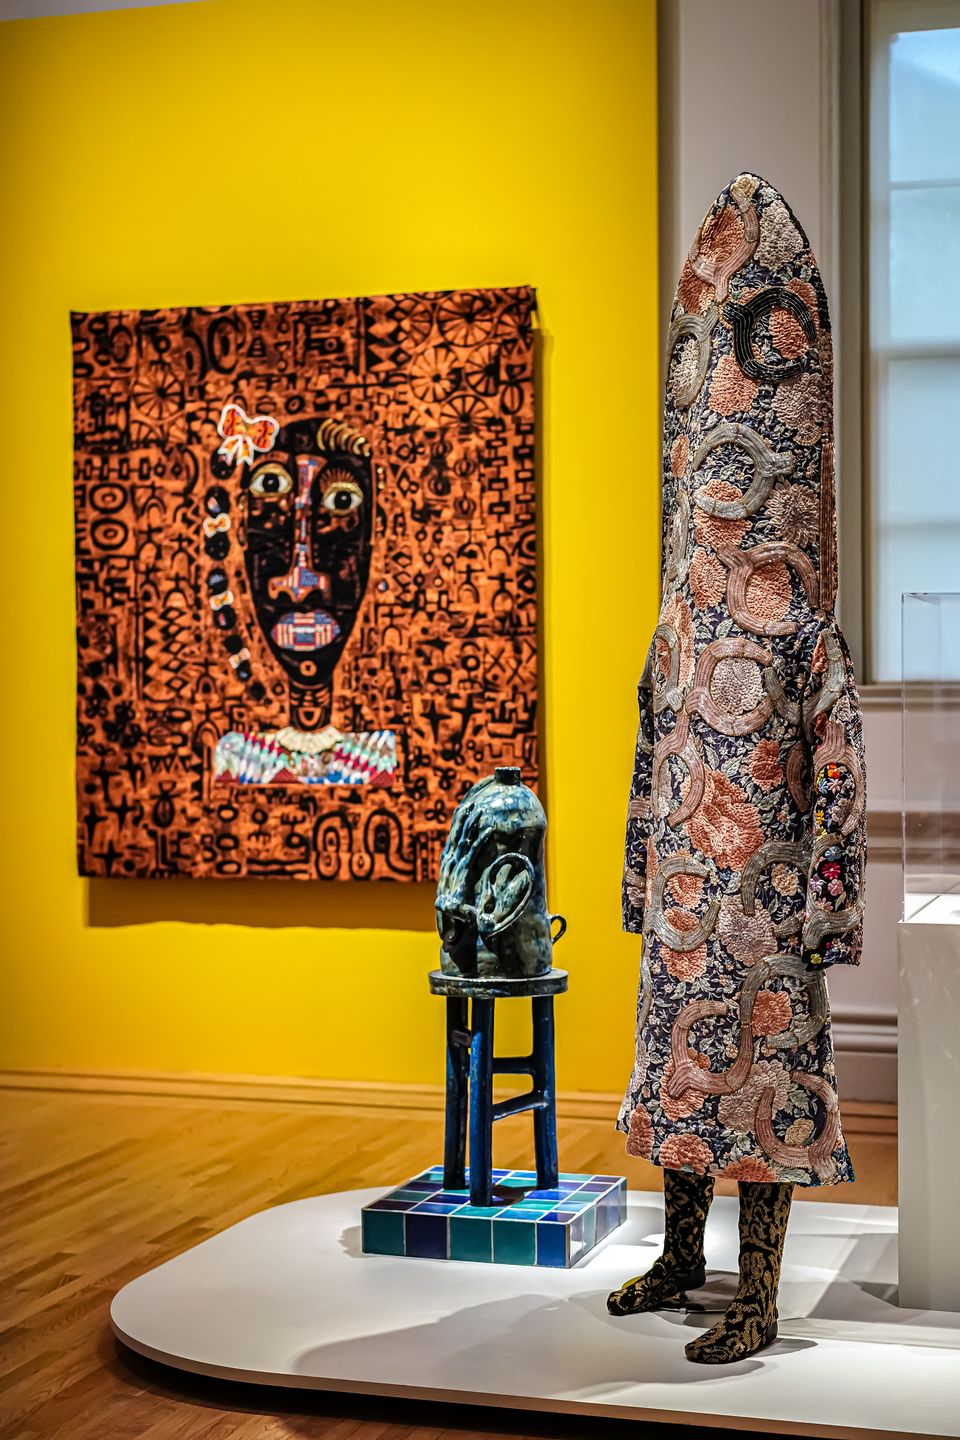 Gallery view of two sculptures standing in front of a quilt, which hangs on a bright yellow wall.